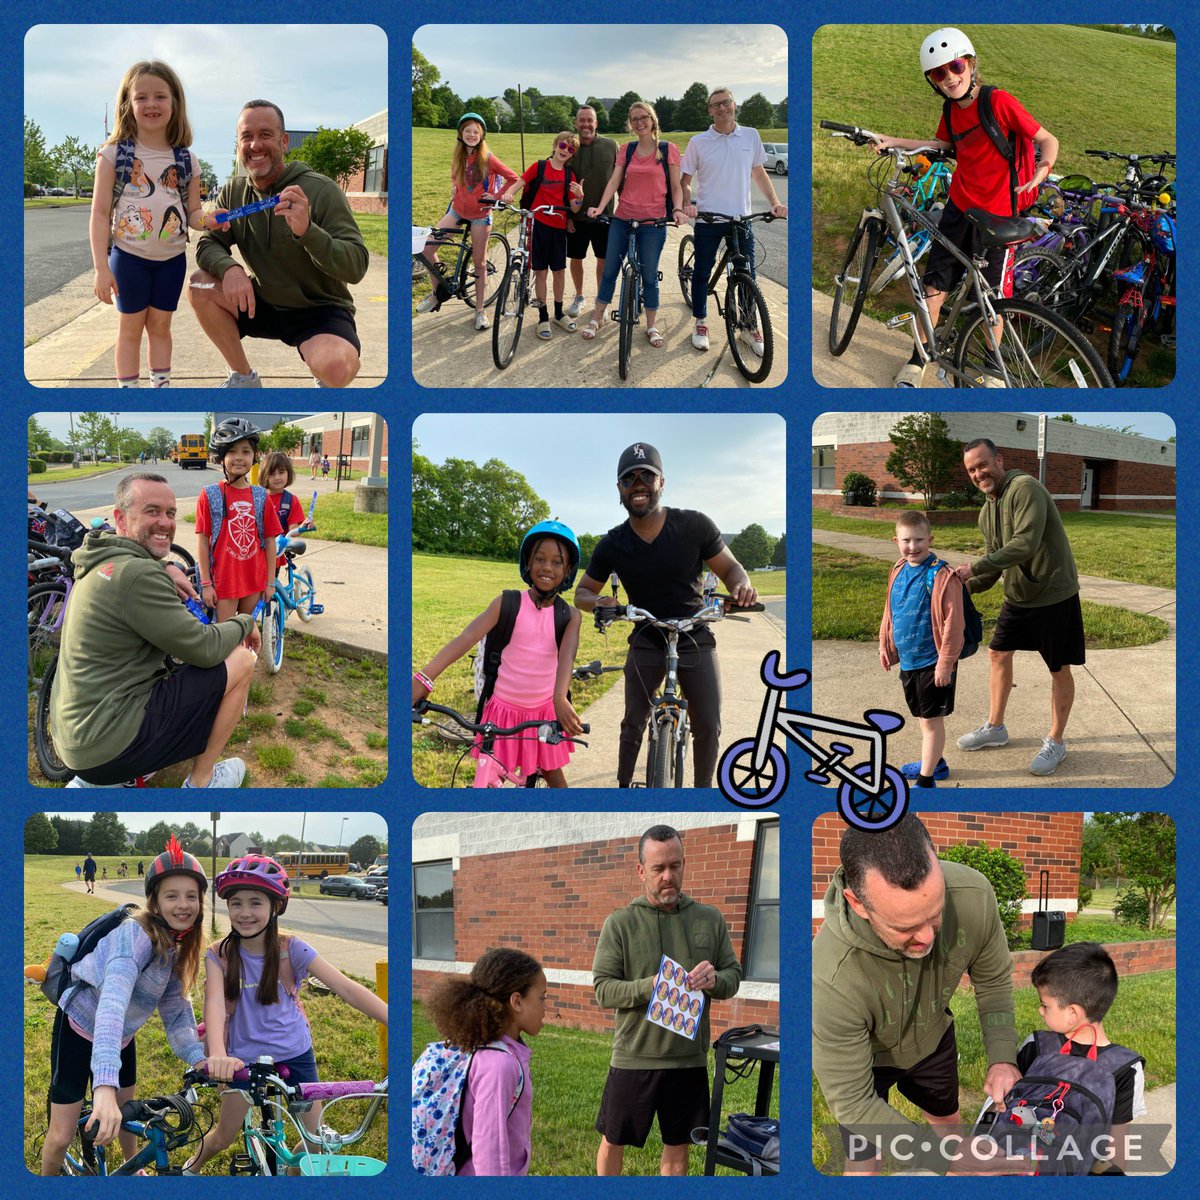 This morning was fantastic watching our tornadoes 🌪️ bike to school for National Bike to School Day! Huge shoutout to our incredible PE coaches for making this day so enjoyable and something we always look forward to! 🚴‍♀️ #NationalBikeToSchoolDay